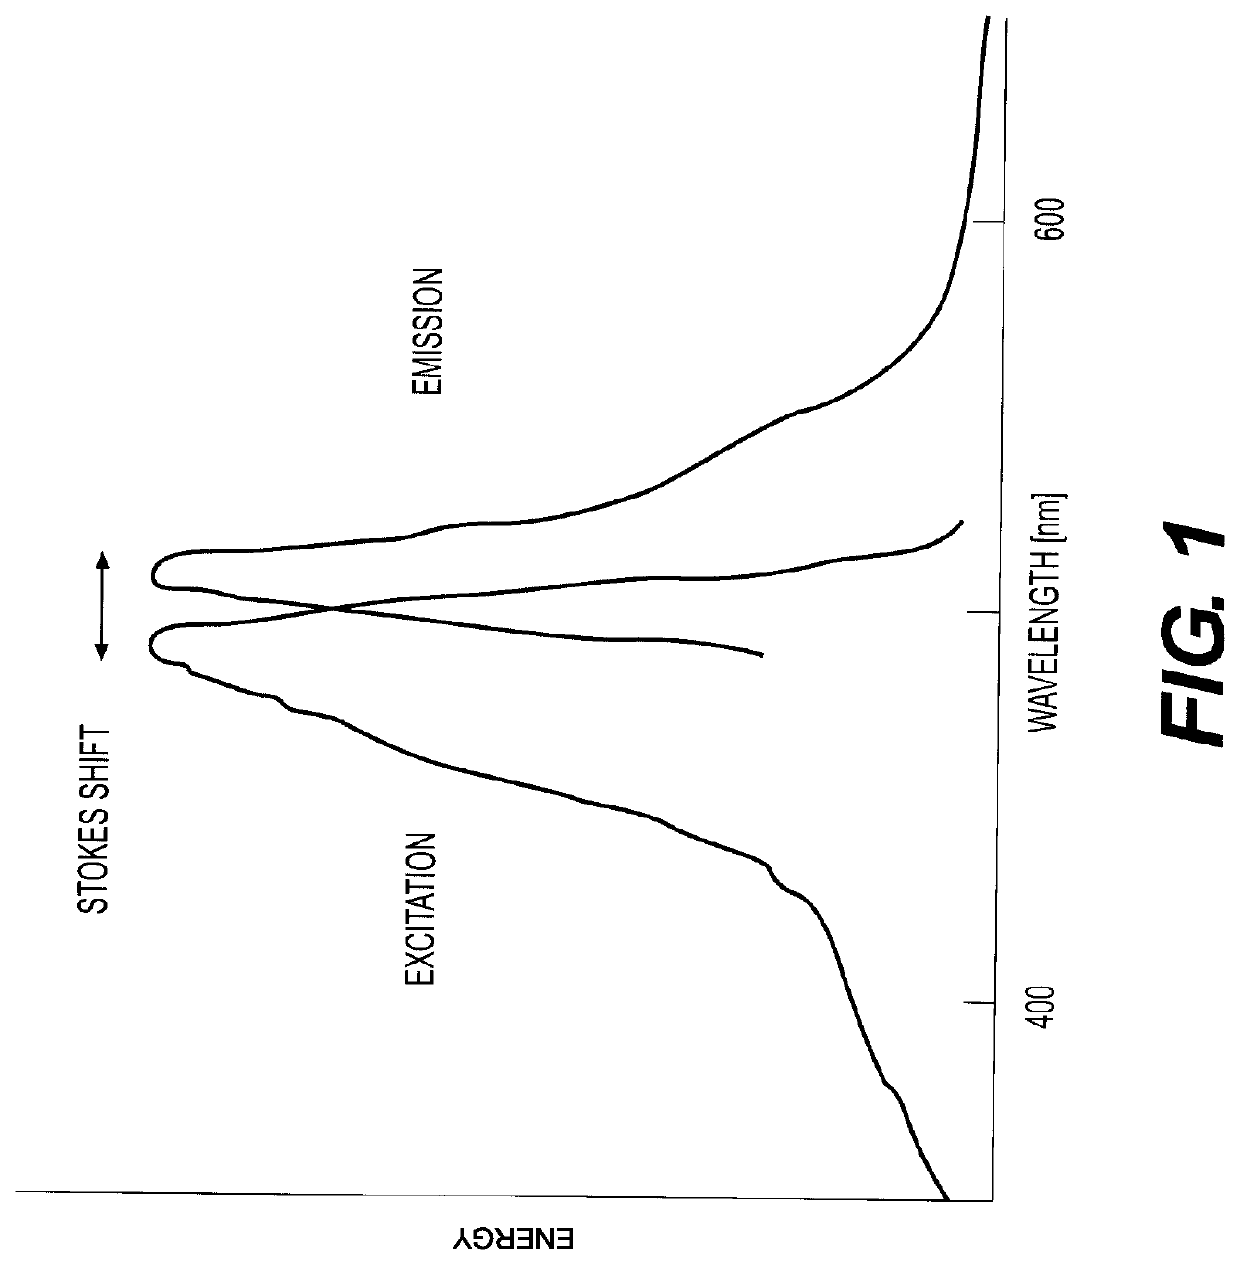 Biophotonic compositions for treating skin and soft tissue wounds having either or both non-resistant and resistant infections